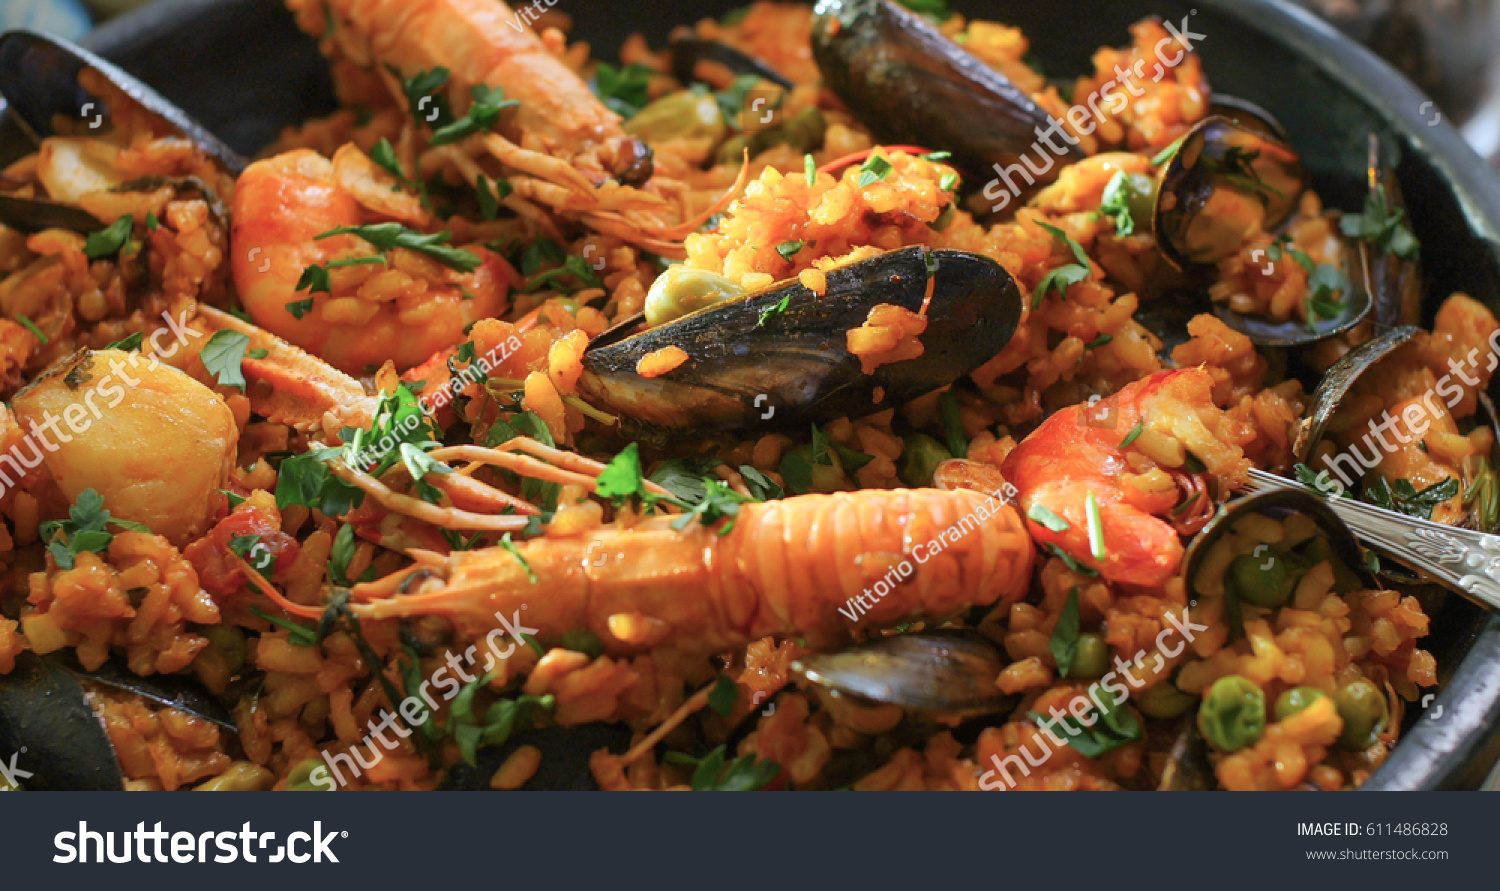 Extreme close up view of delicious Spanish seafood paella: mussels, king prawns, langoustine, haddock #611486828